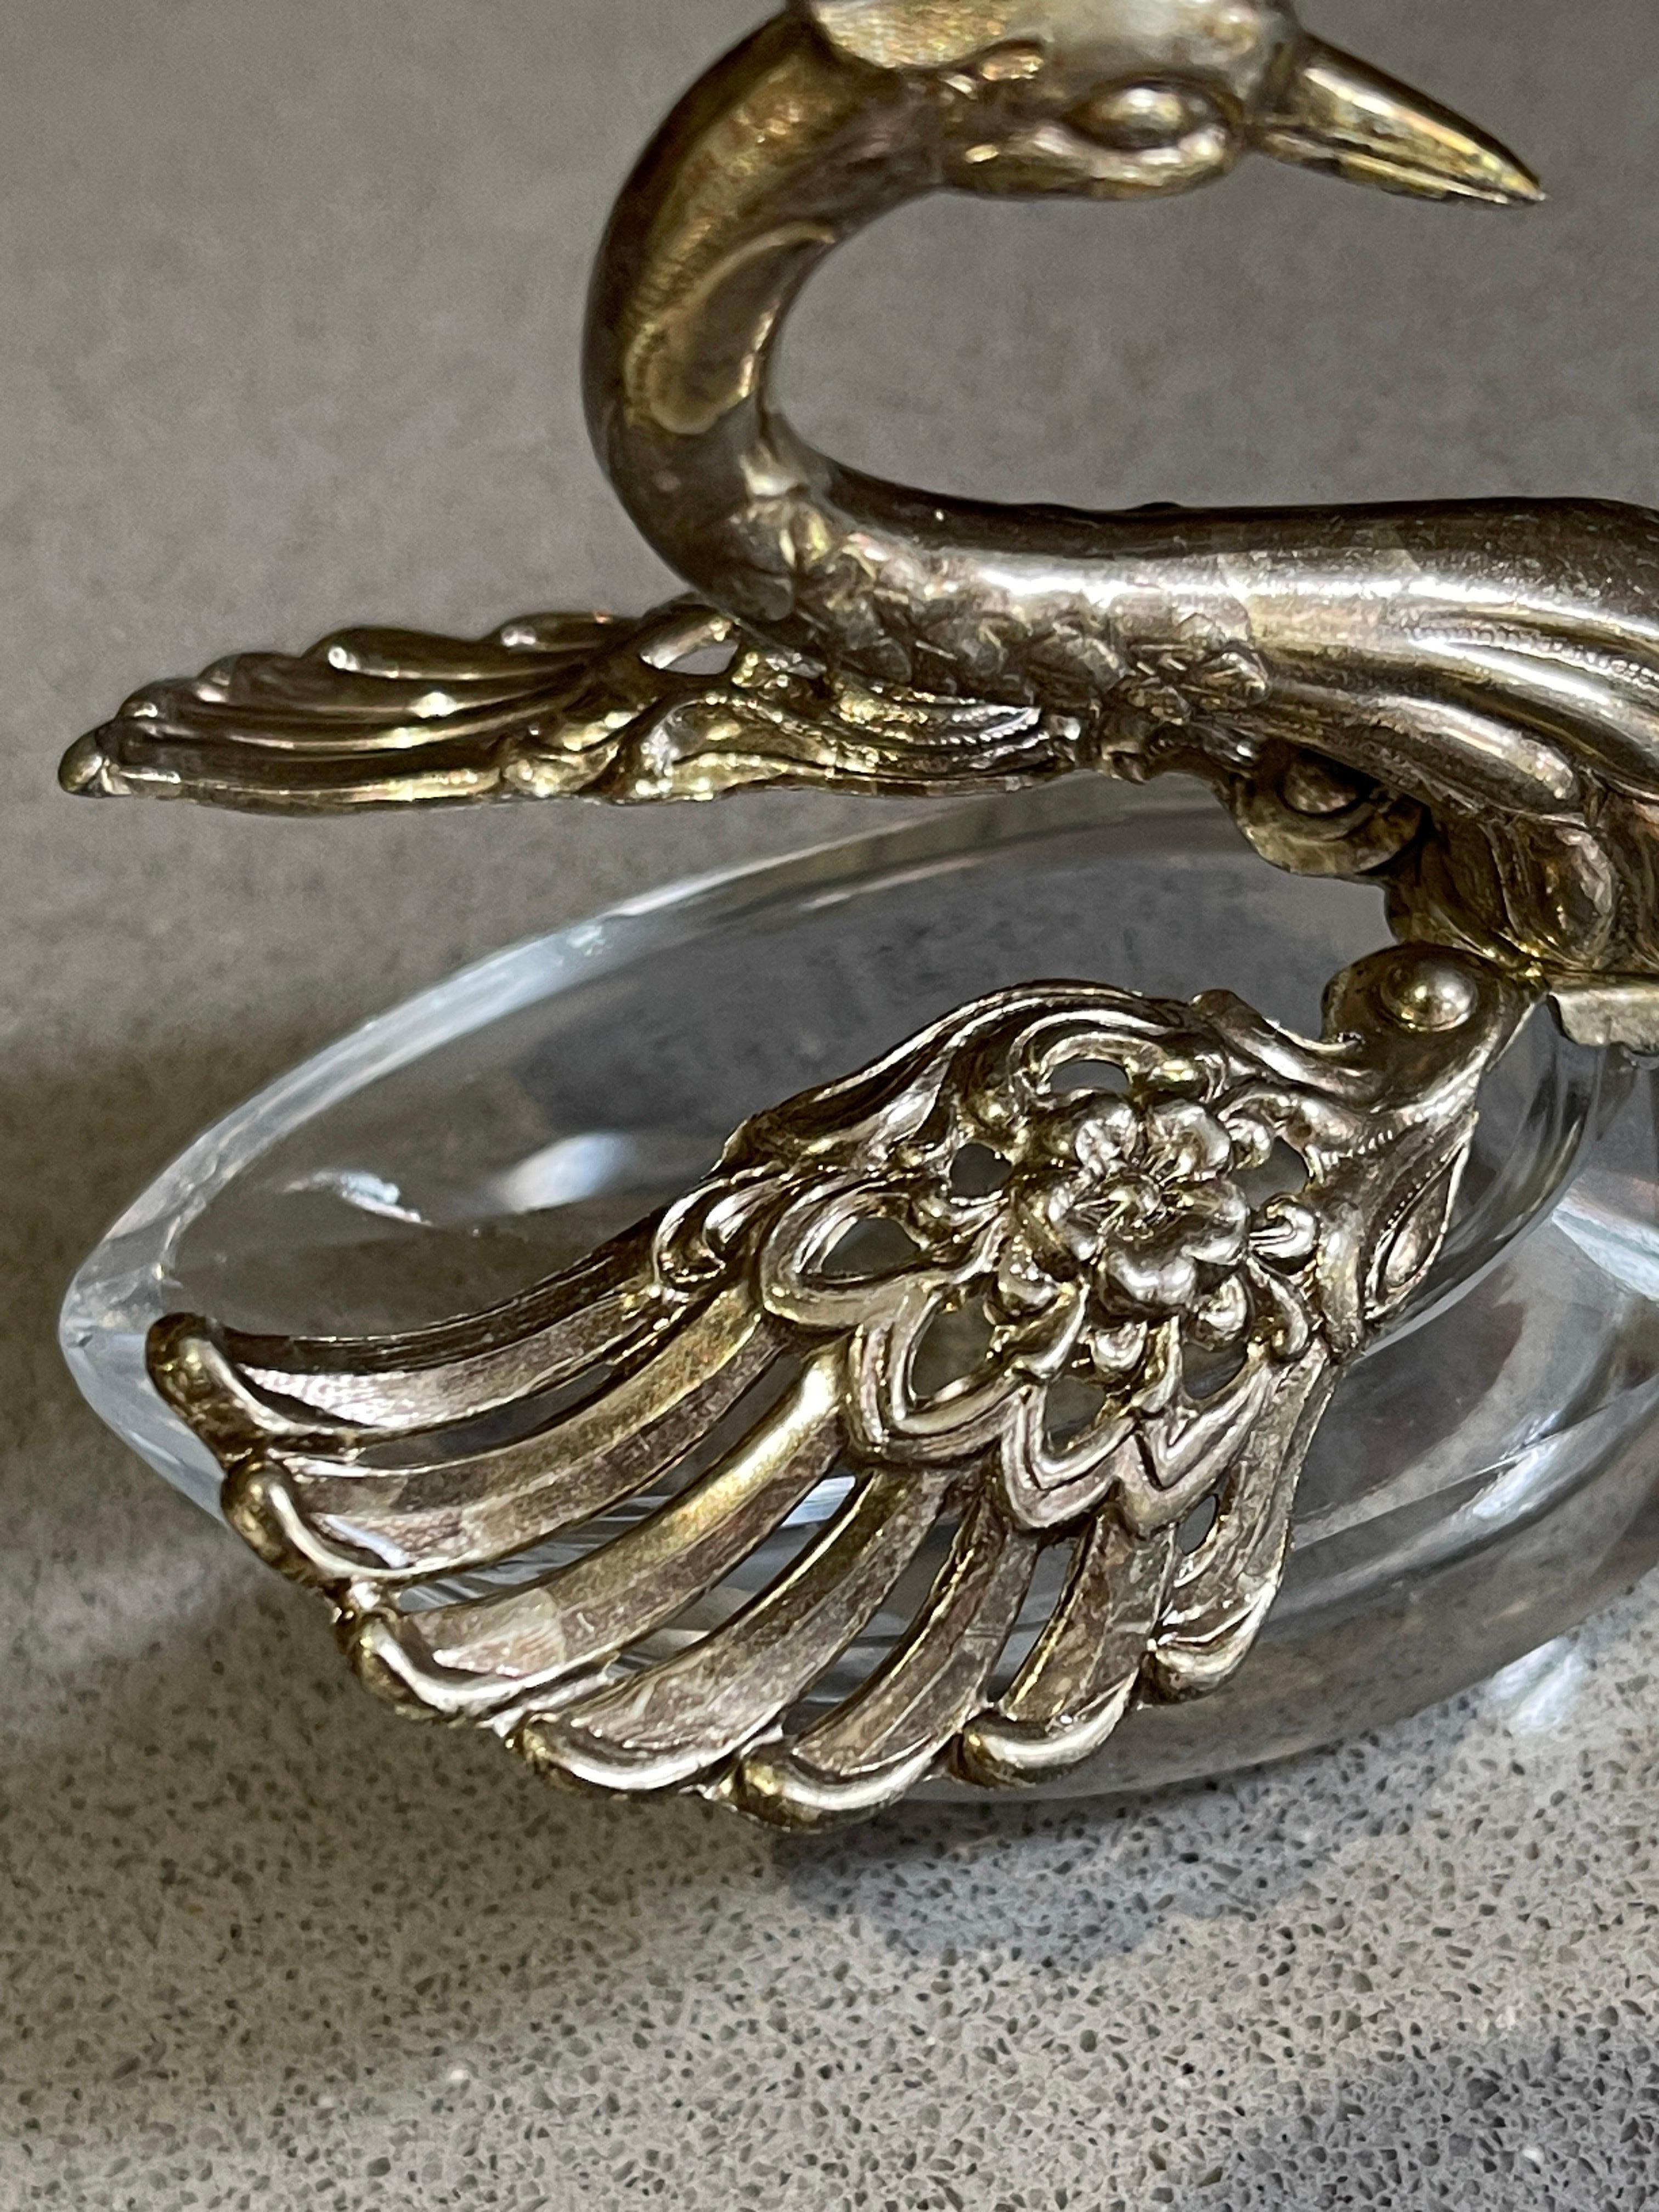 Silver Salt Shaker, A Pair of Antique Salt Shaker Crystal Swann Moving Wings For Sale 1